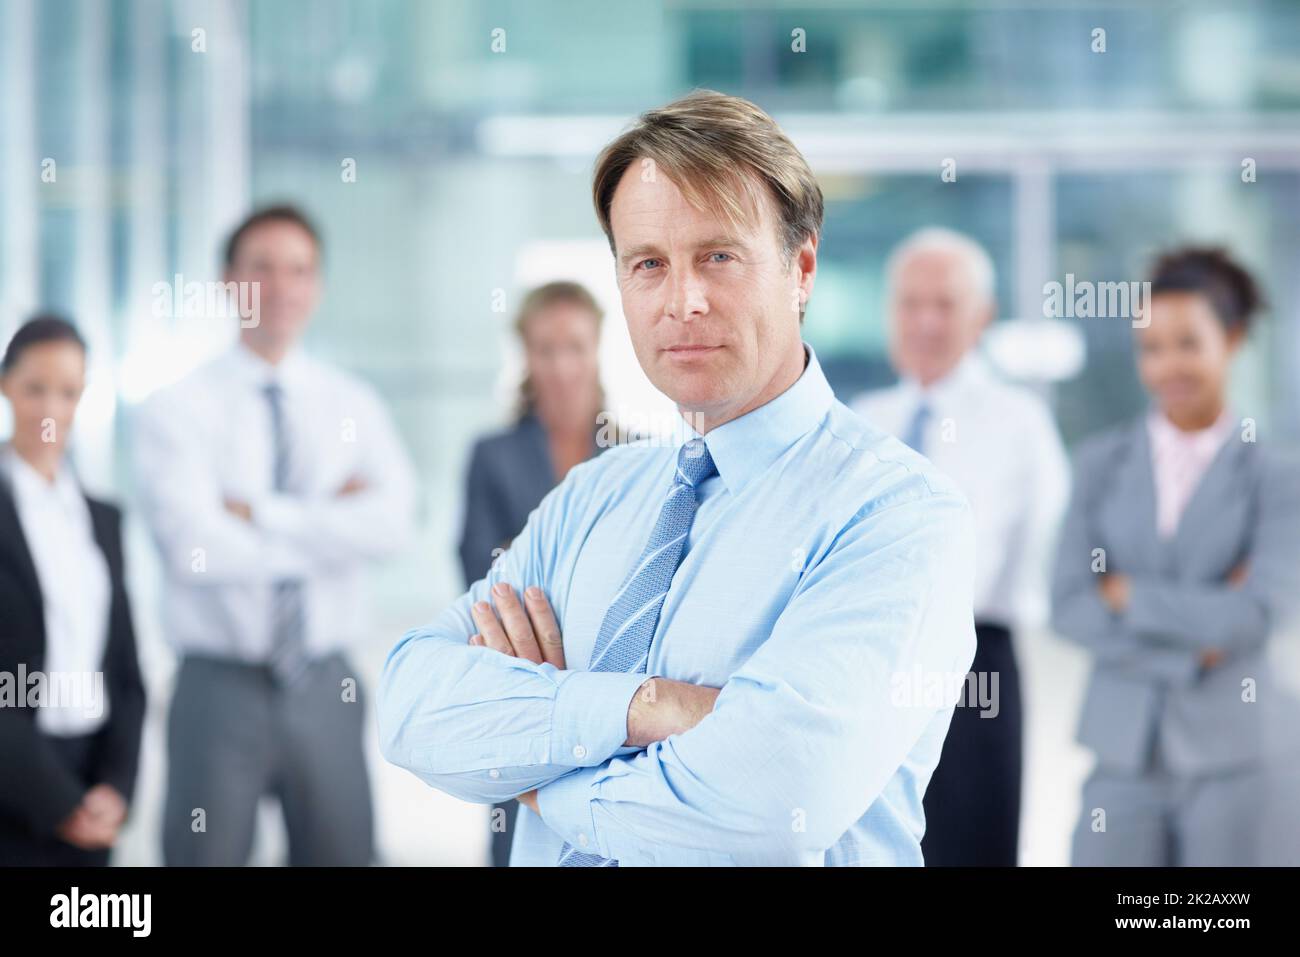 Hes worked hard for his success. Confident mature business executive standing with his team behind him - portrait. Stock Photo